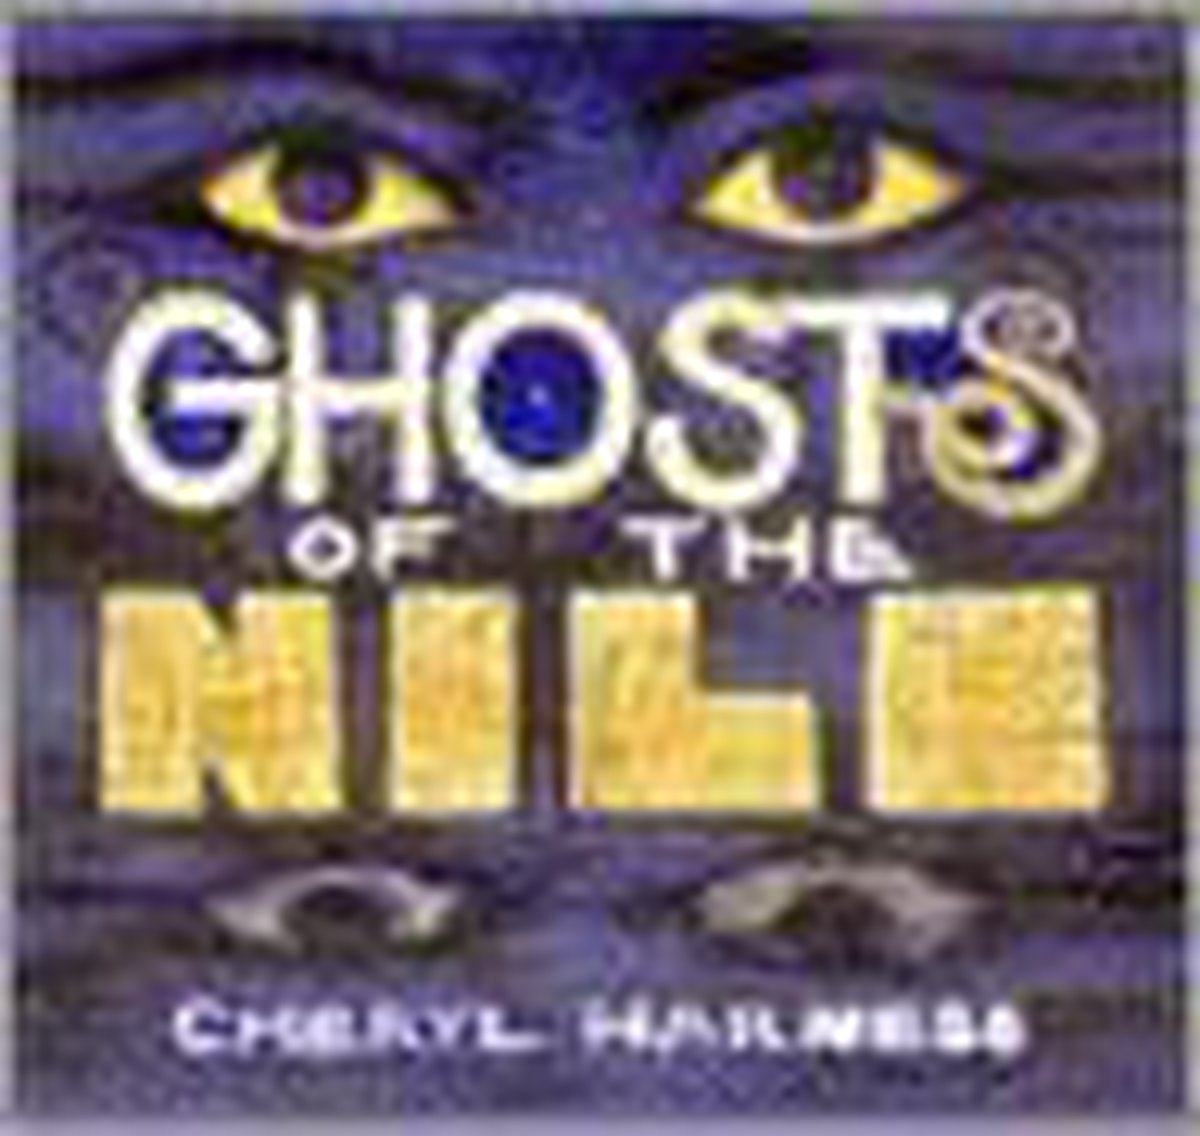 Ghosts of the Nile